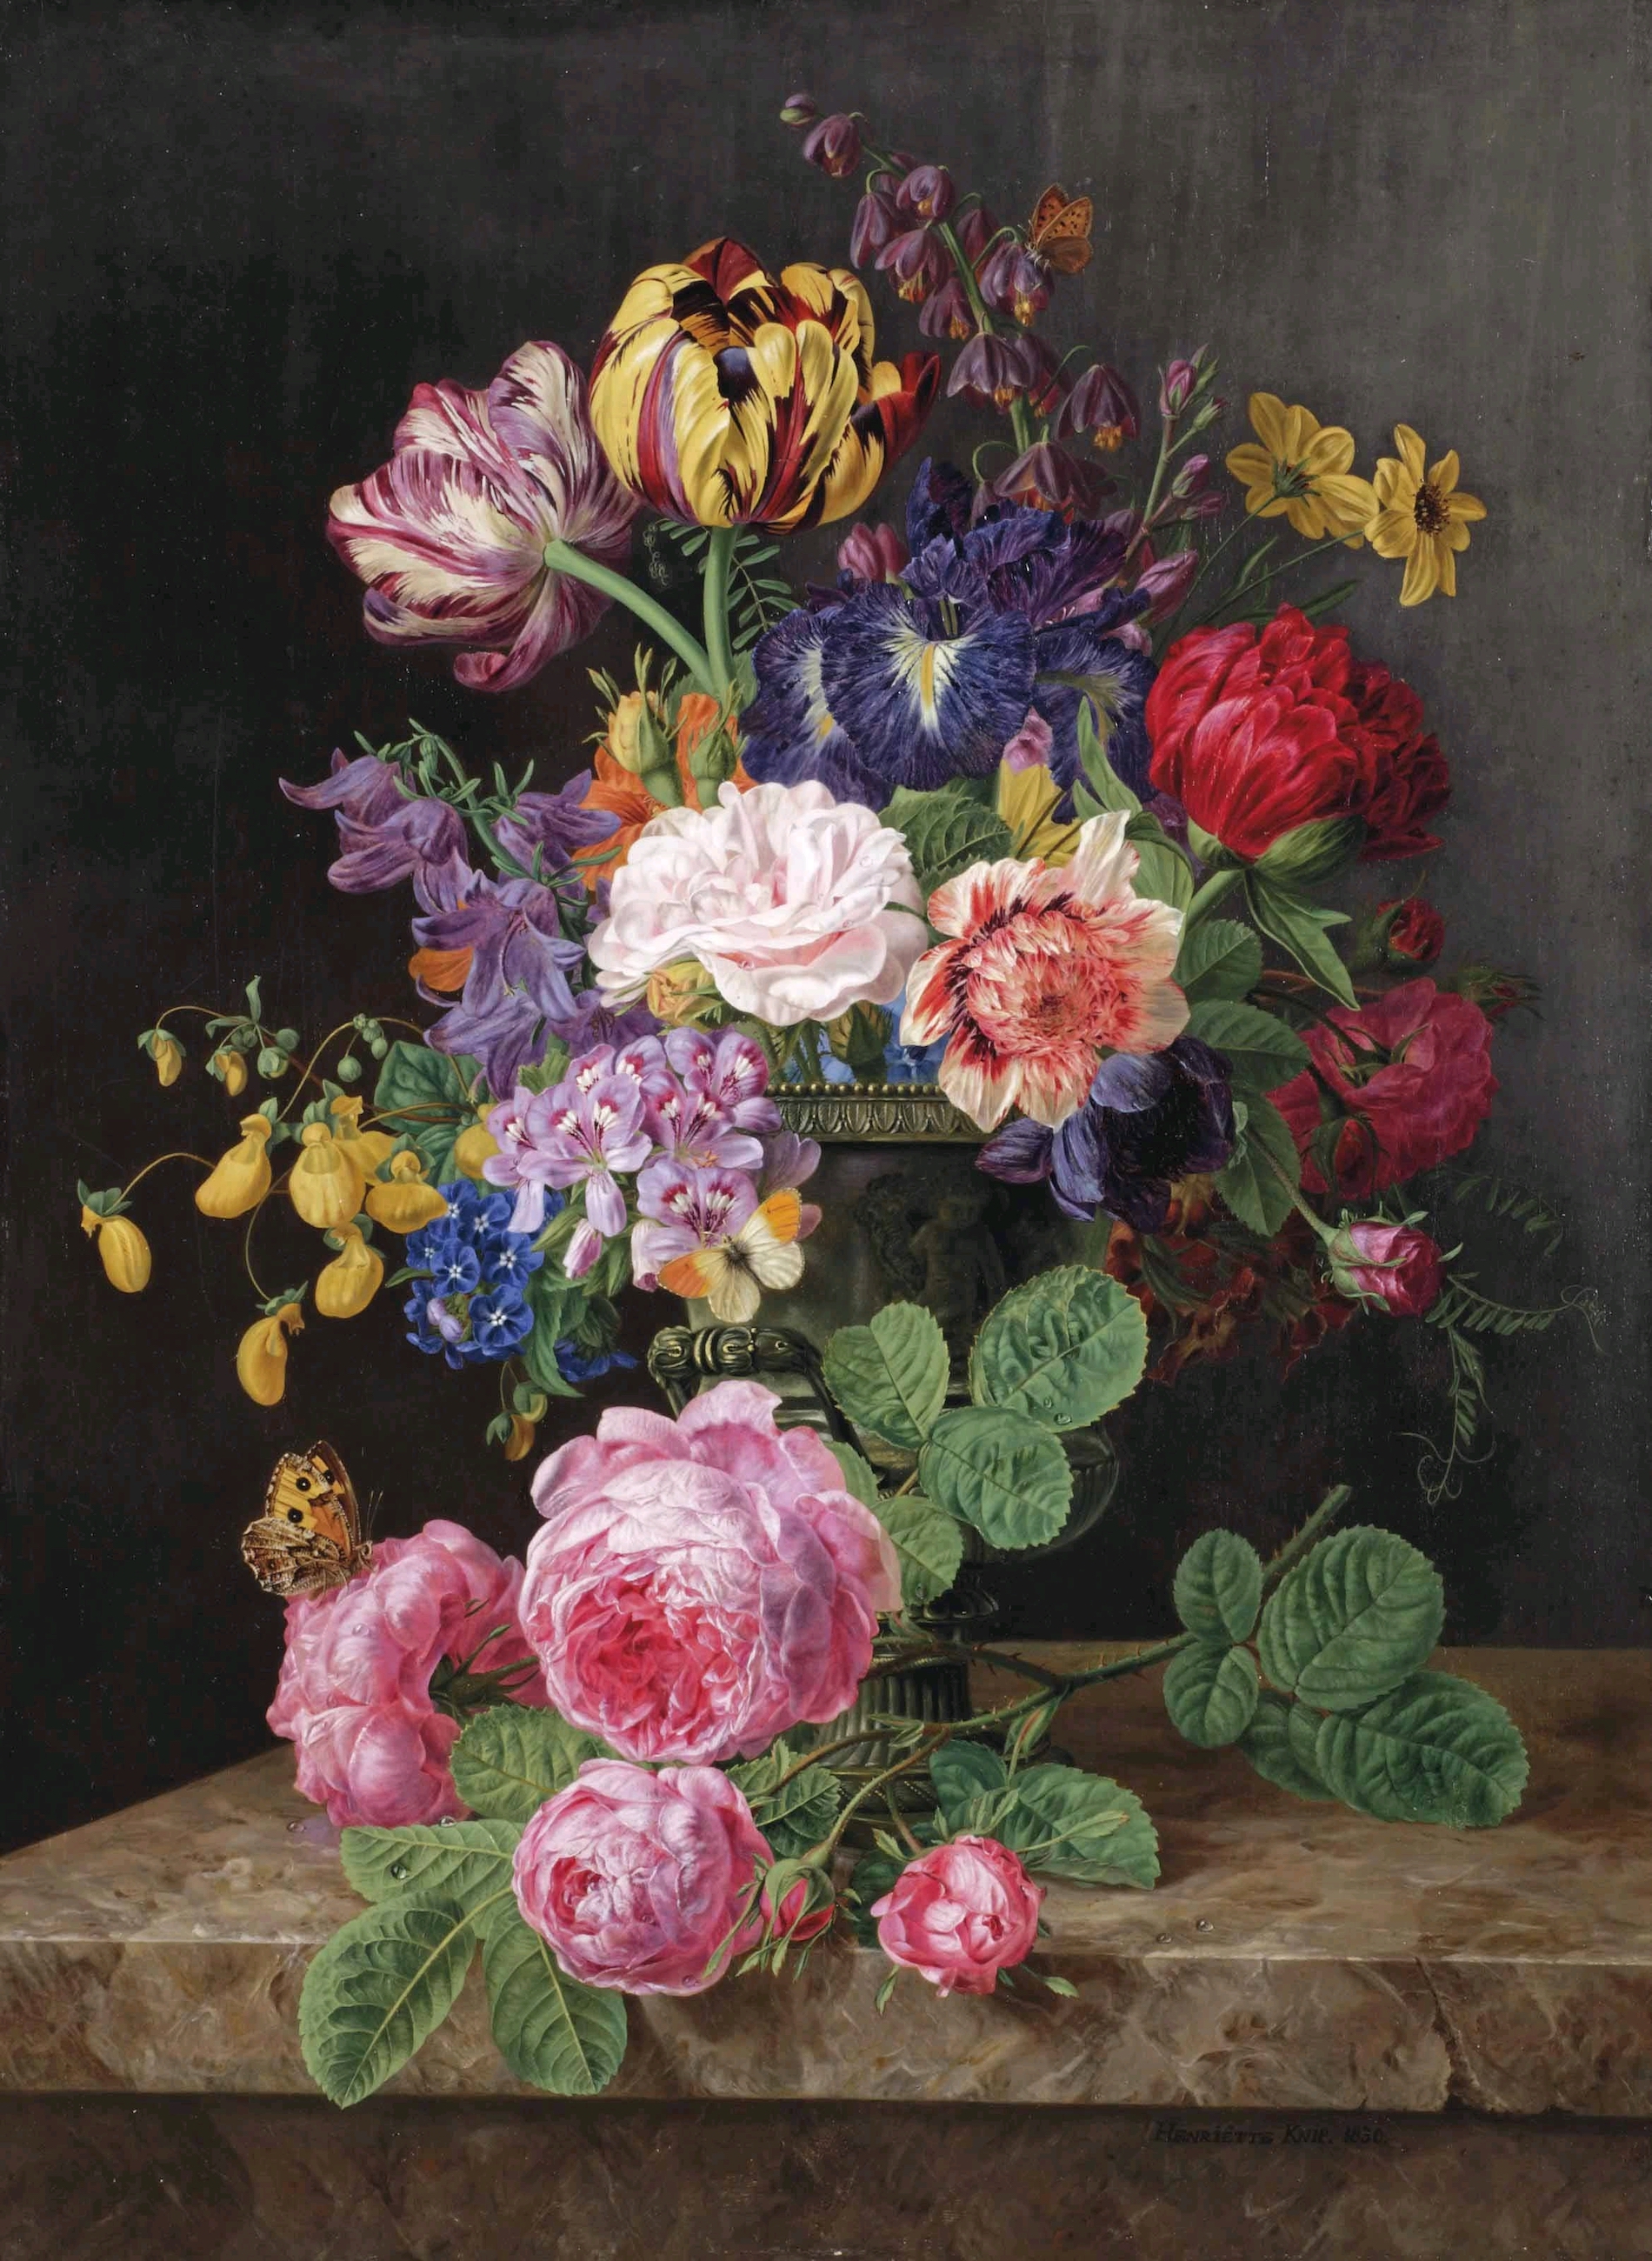 Flowers in a Vase by Henriëtte Geertruida Knip - 1830 - 57 x 42 cm. private collection